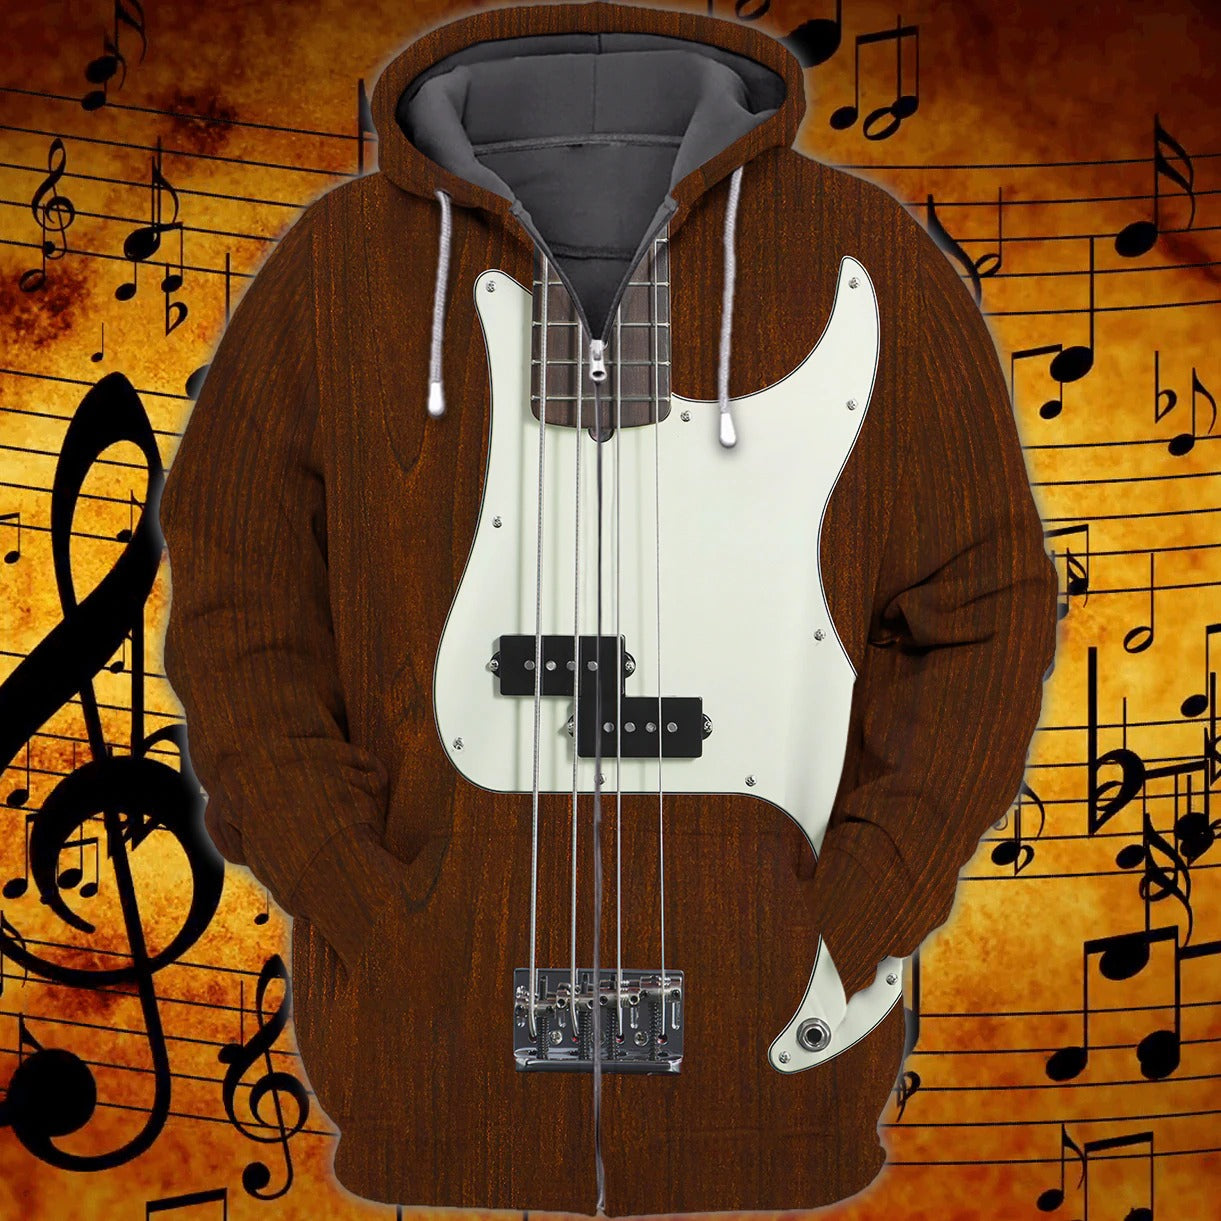 Bass Guitar 3D All Over Printing T Shirt For Guitar Lover/ Best Quality Sublimation Shirts For Bass Guitar Men